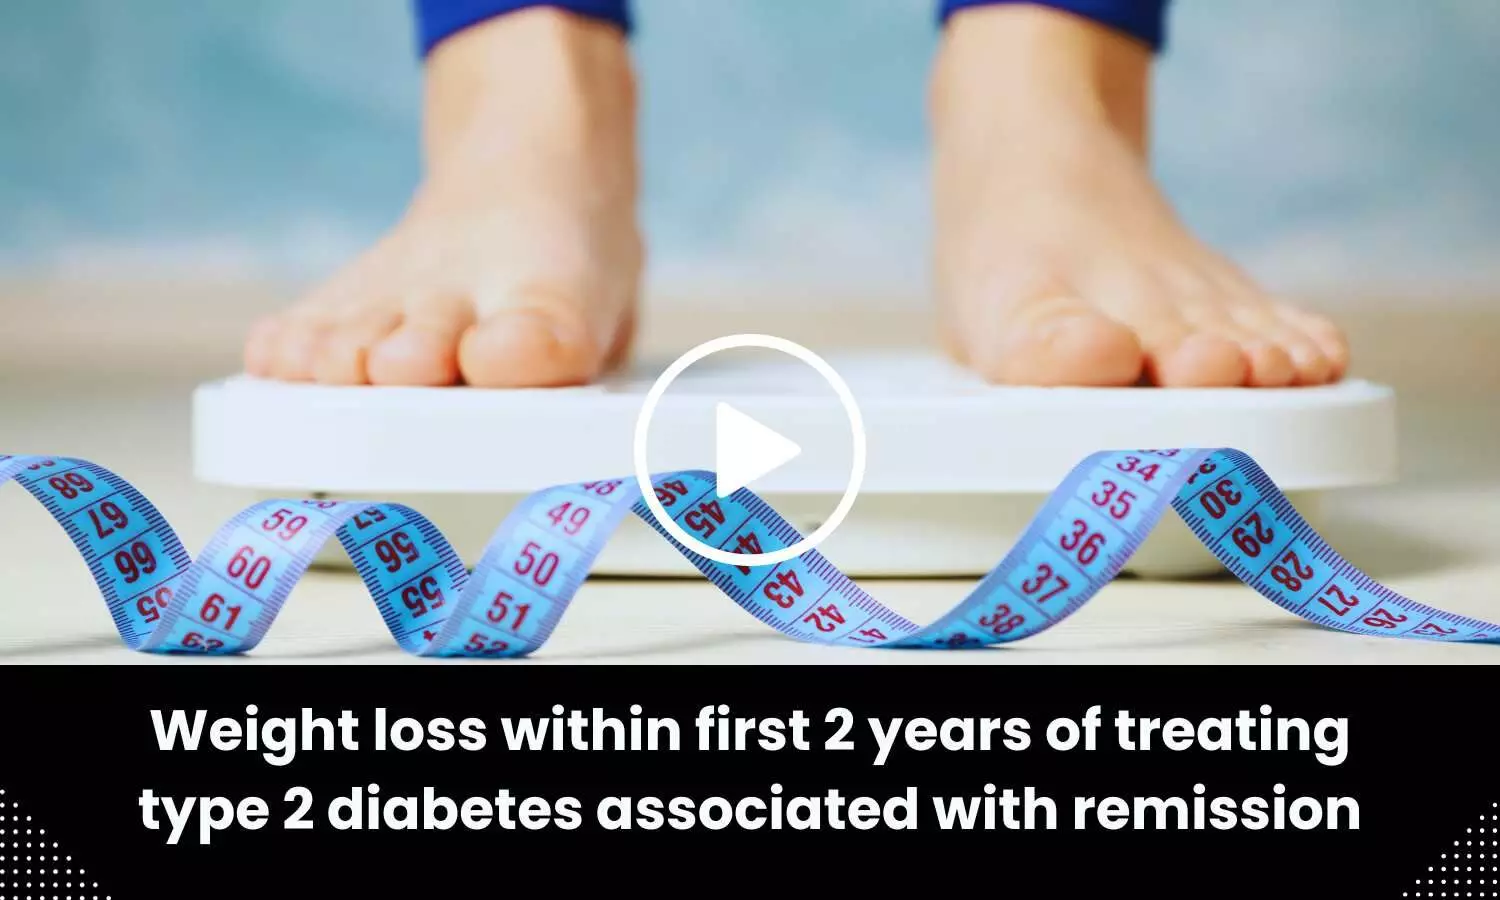 Weight loss within first 2 years of treating type 2 diabetes associated with remission